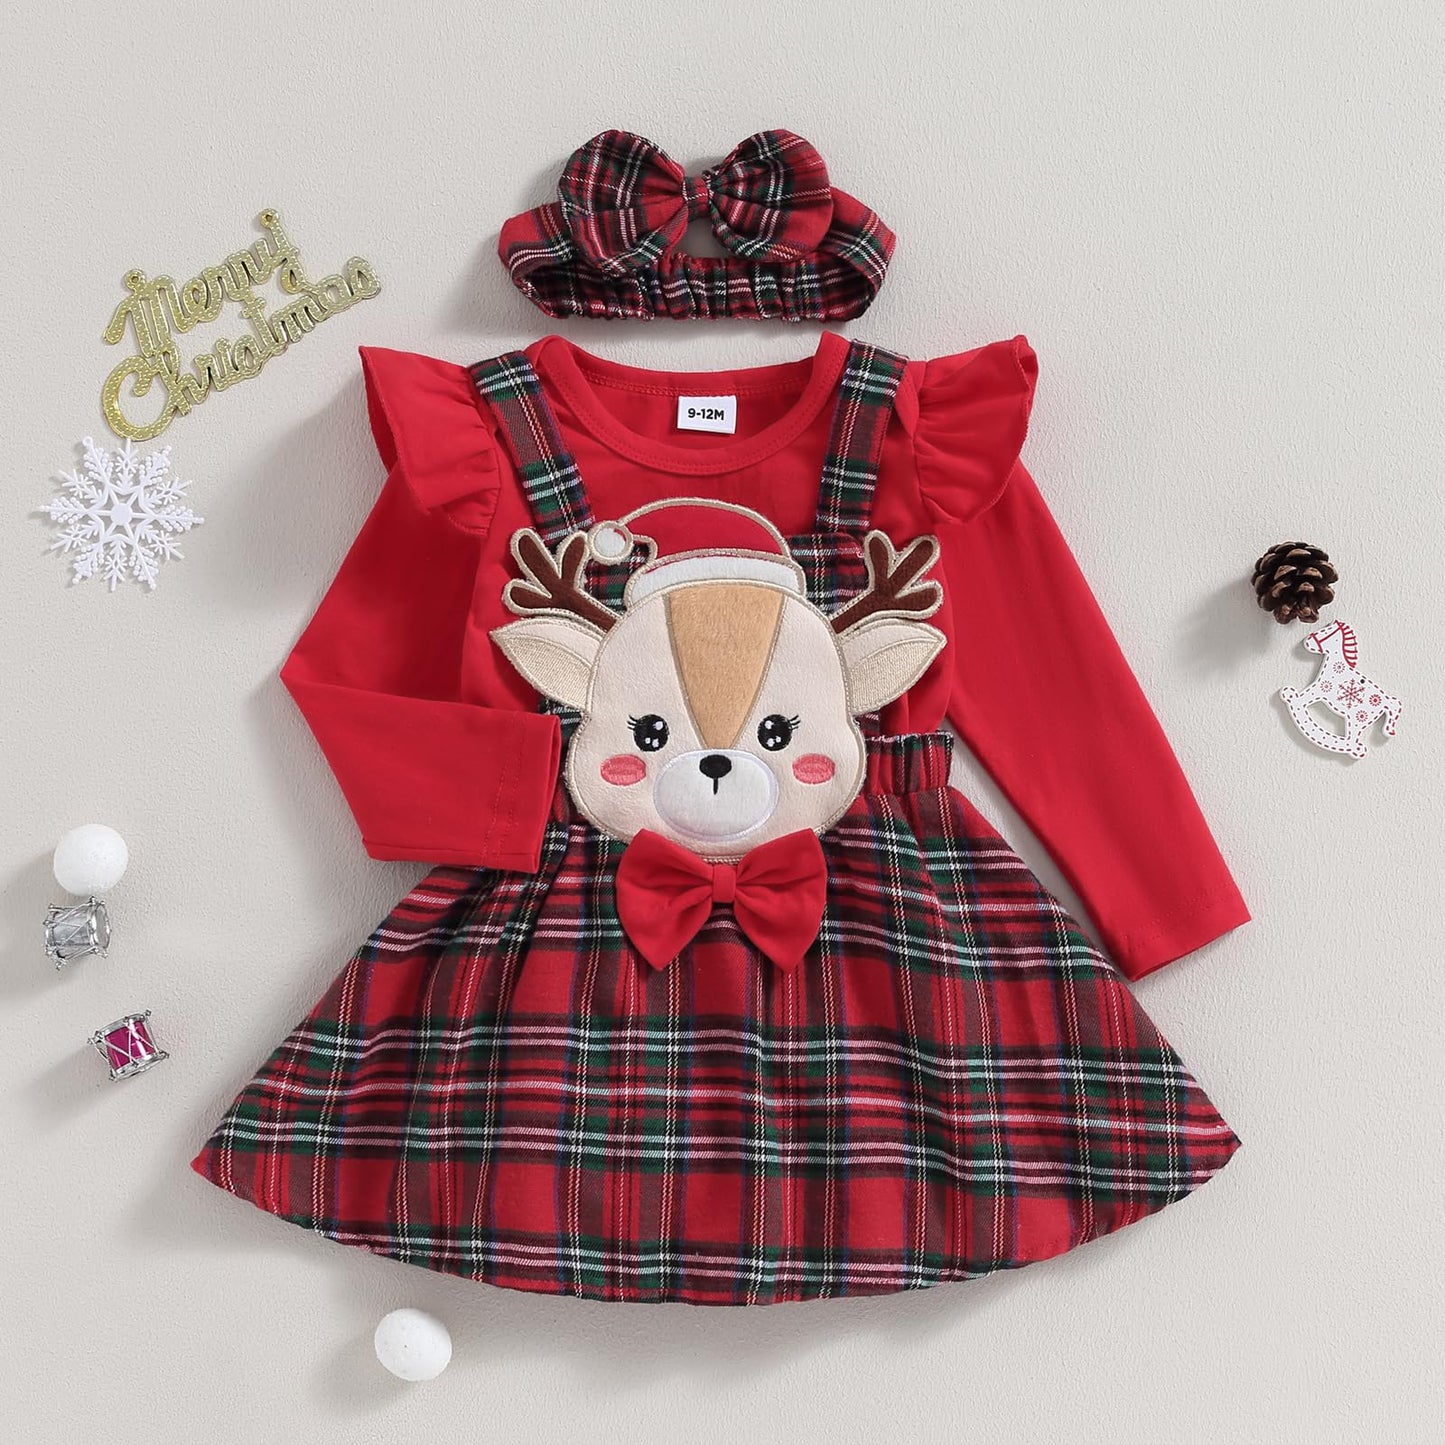 sweetyhouse Baby Girl Christmas Outfit Long Sleeve Romper Onesie Cute Elk Plaid Skirts Sets Headband Winter Clothes